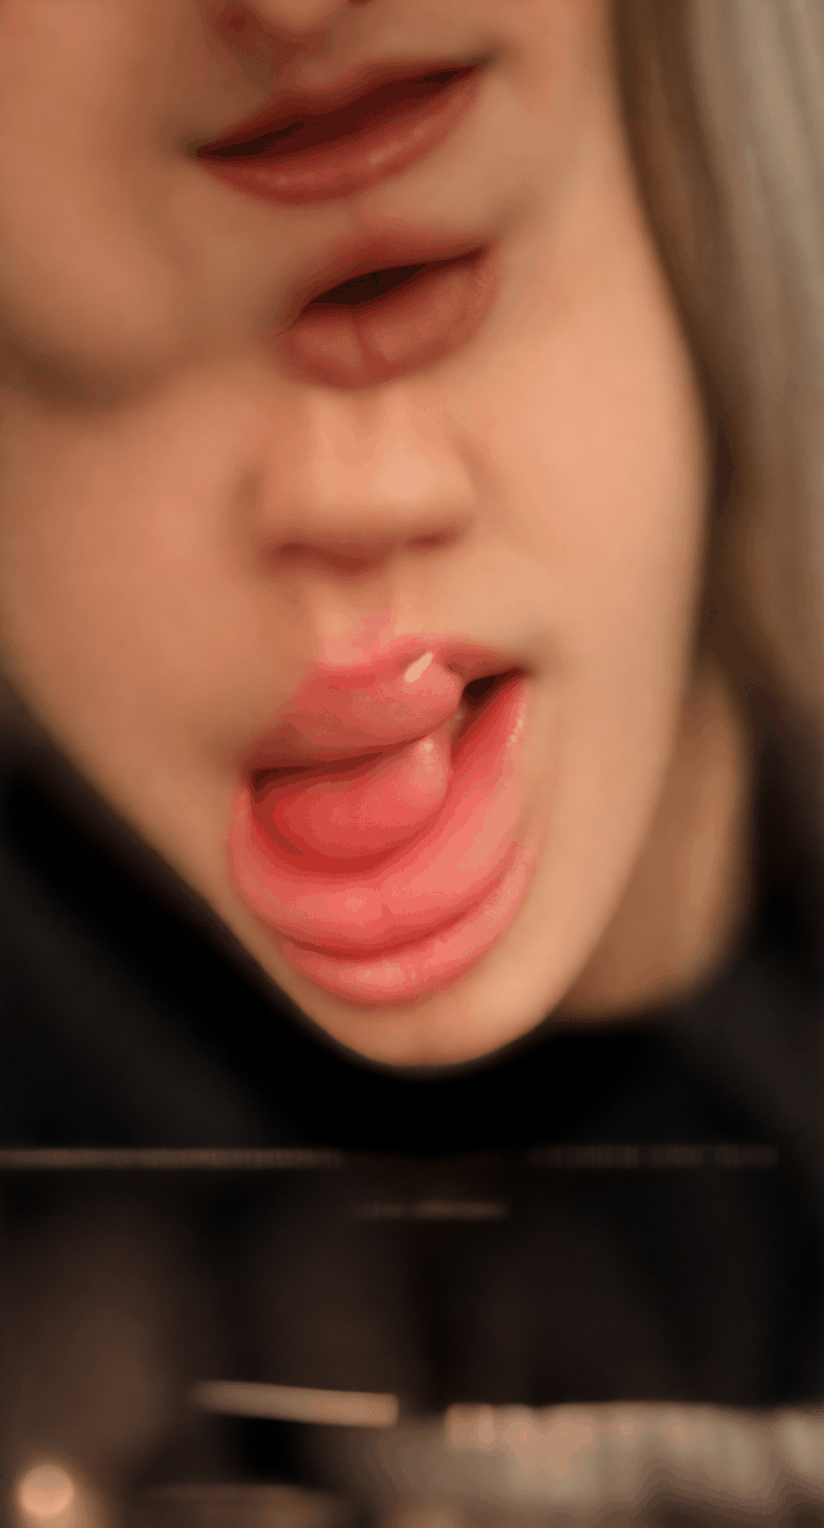 Girl moving her tongue